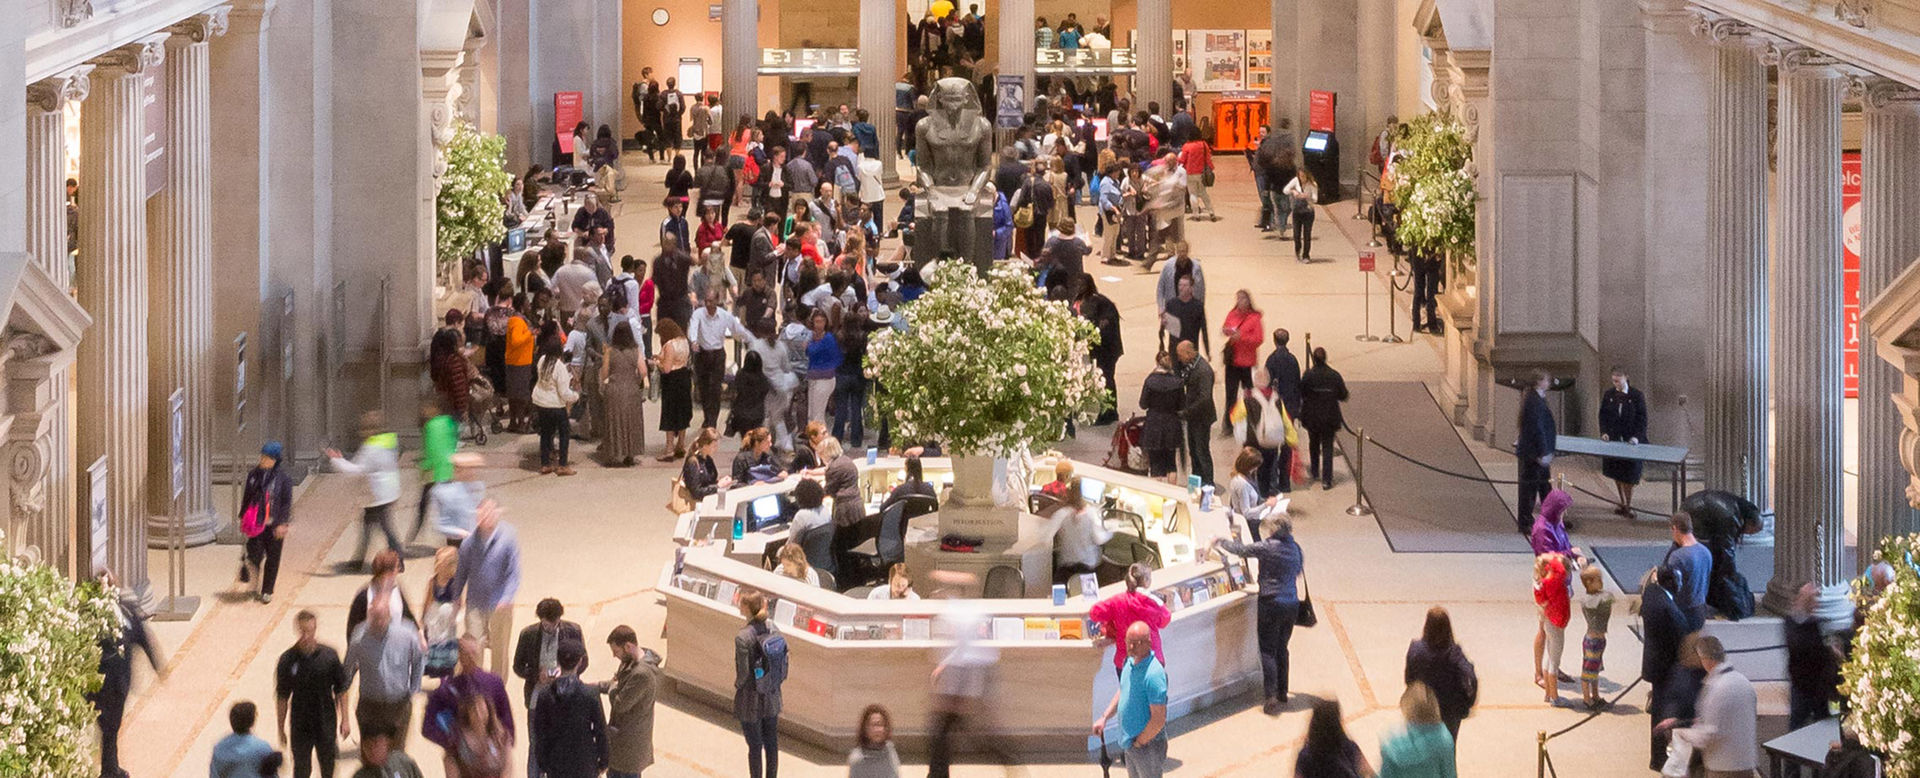 View of The Metropolitan Museum of Art's great hall filled with visitors.